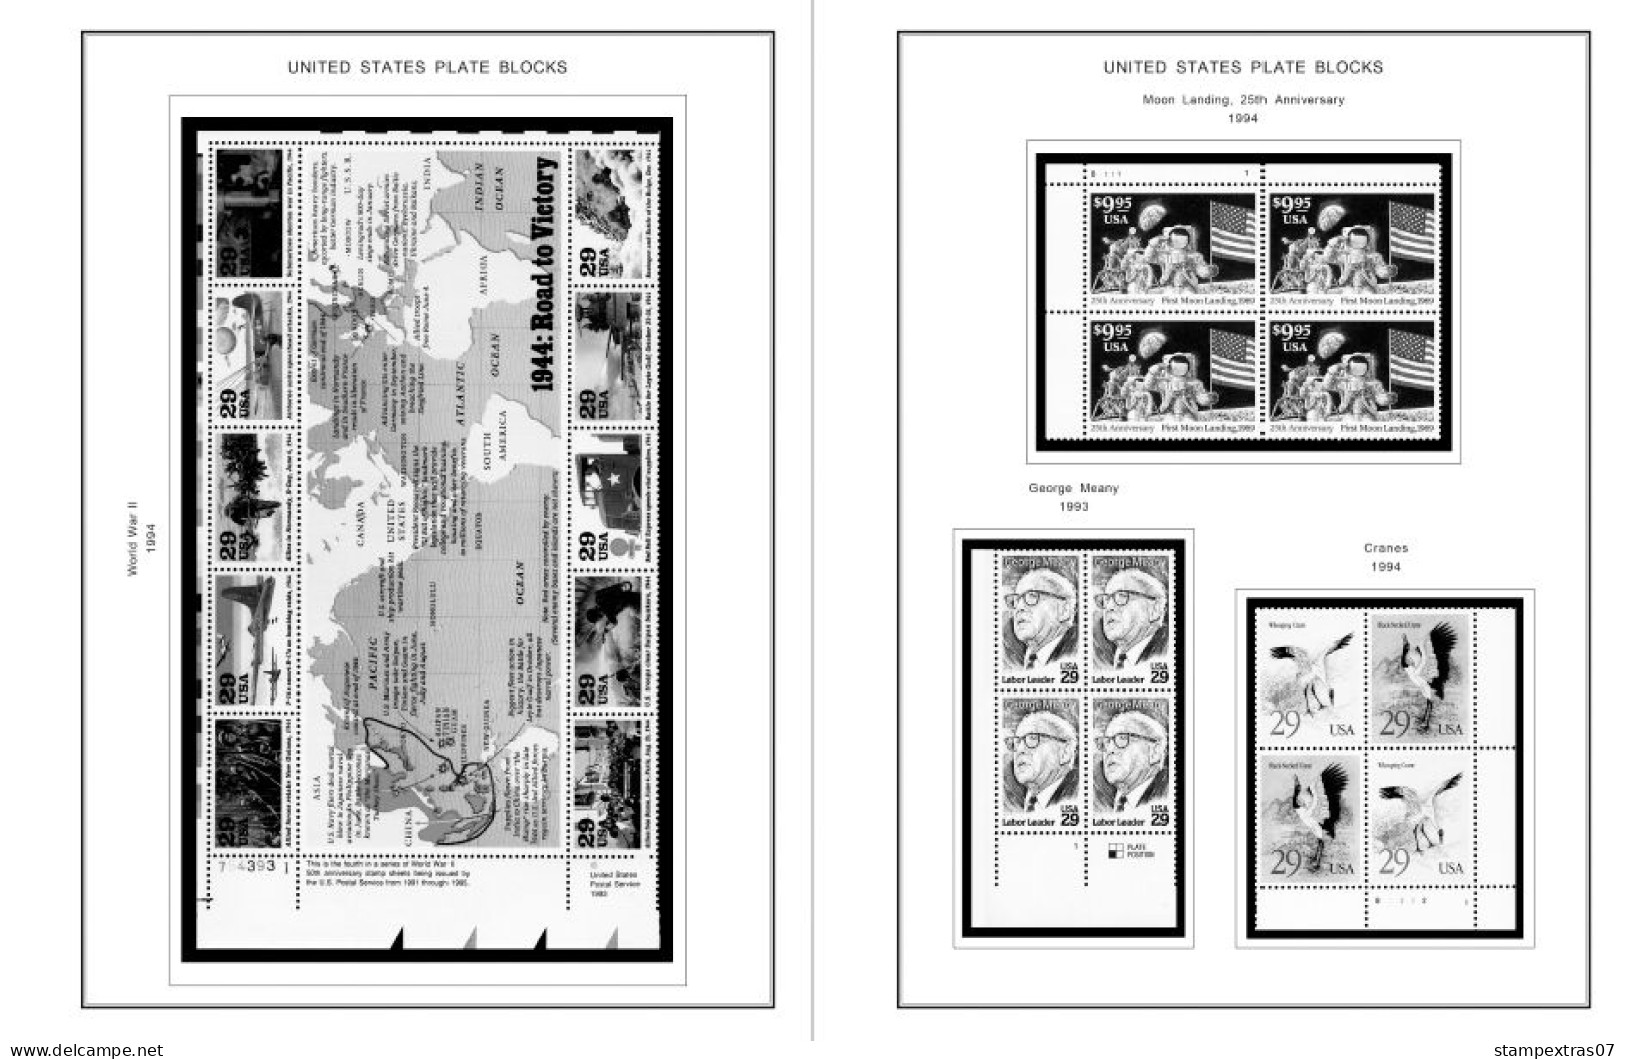 US 1990-1999 PLATE BLOCKS STAMP ALBUM PAGES (119 b&w illustrated pages)